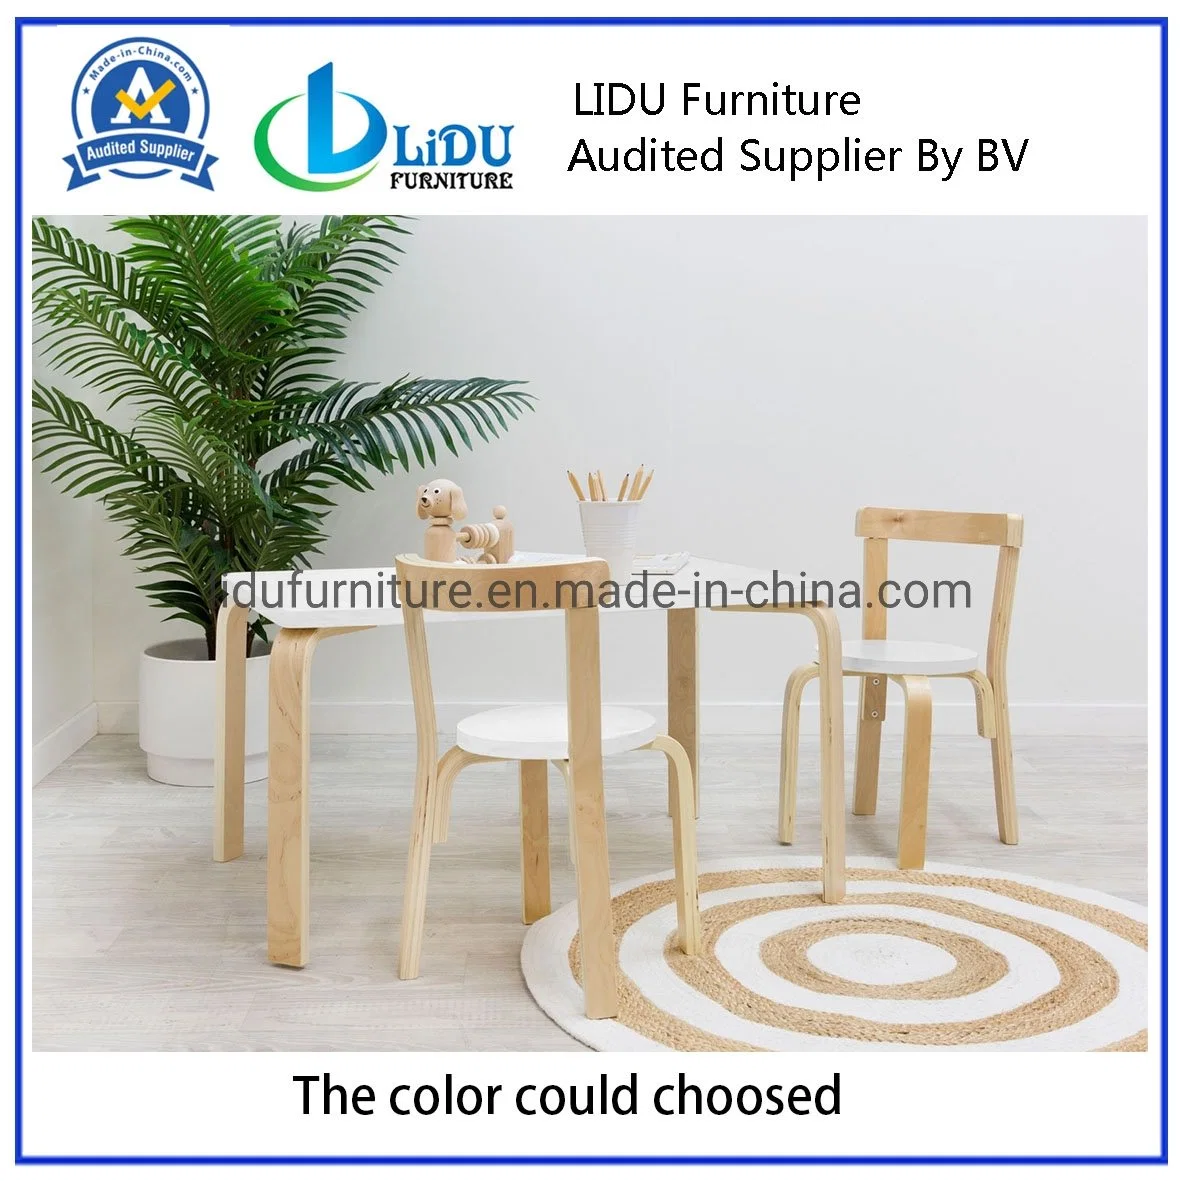 Wooden Kids Table New Design Pre-School Table Sets Activity Table for Playroom